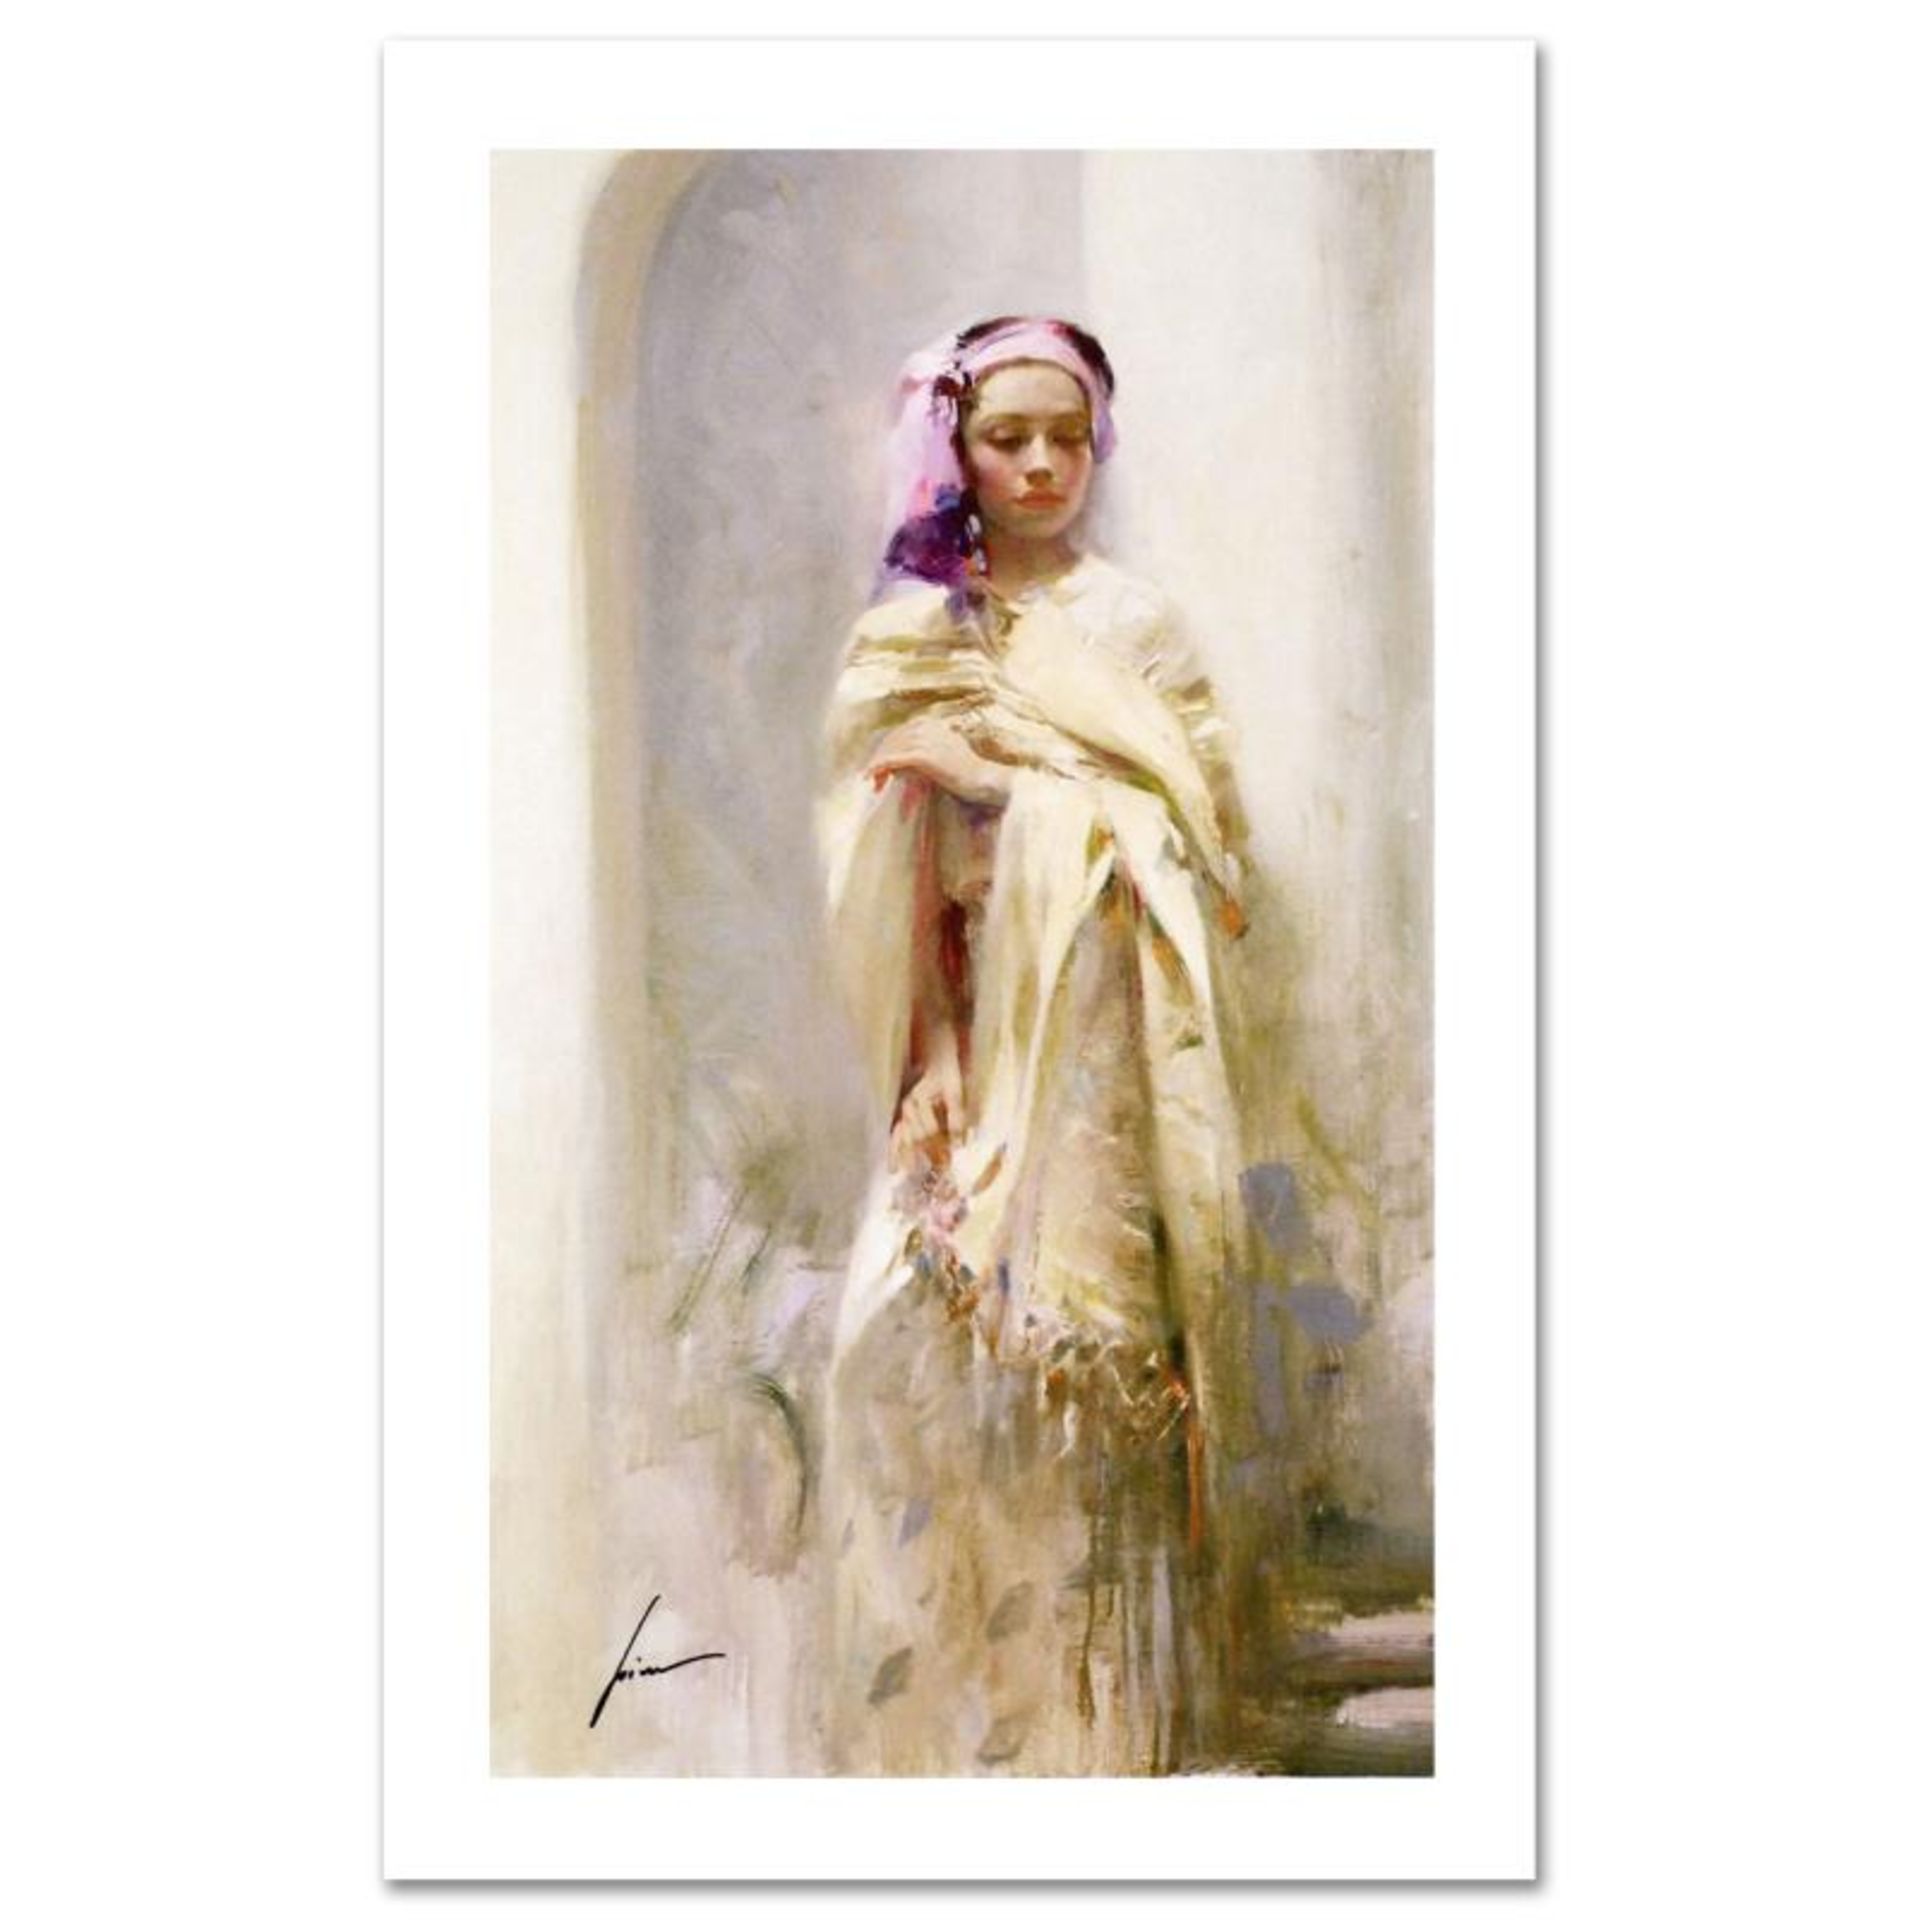 Pino (1931-2010), "The Silk Shawl" Limited Edition on Canvas, Numbered and Hand